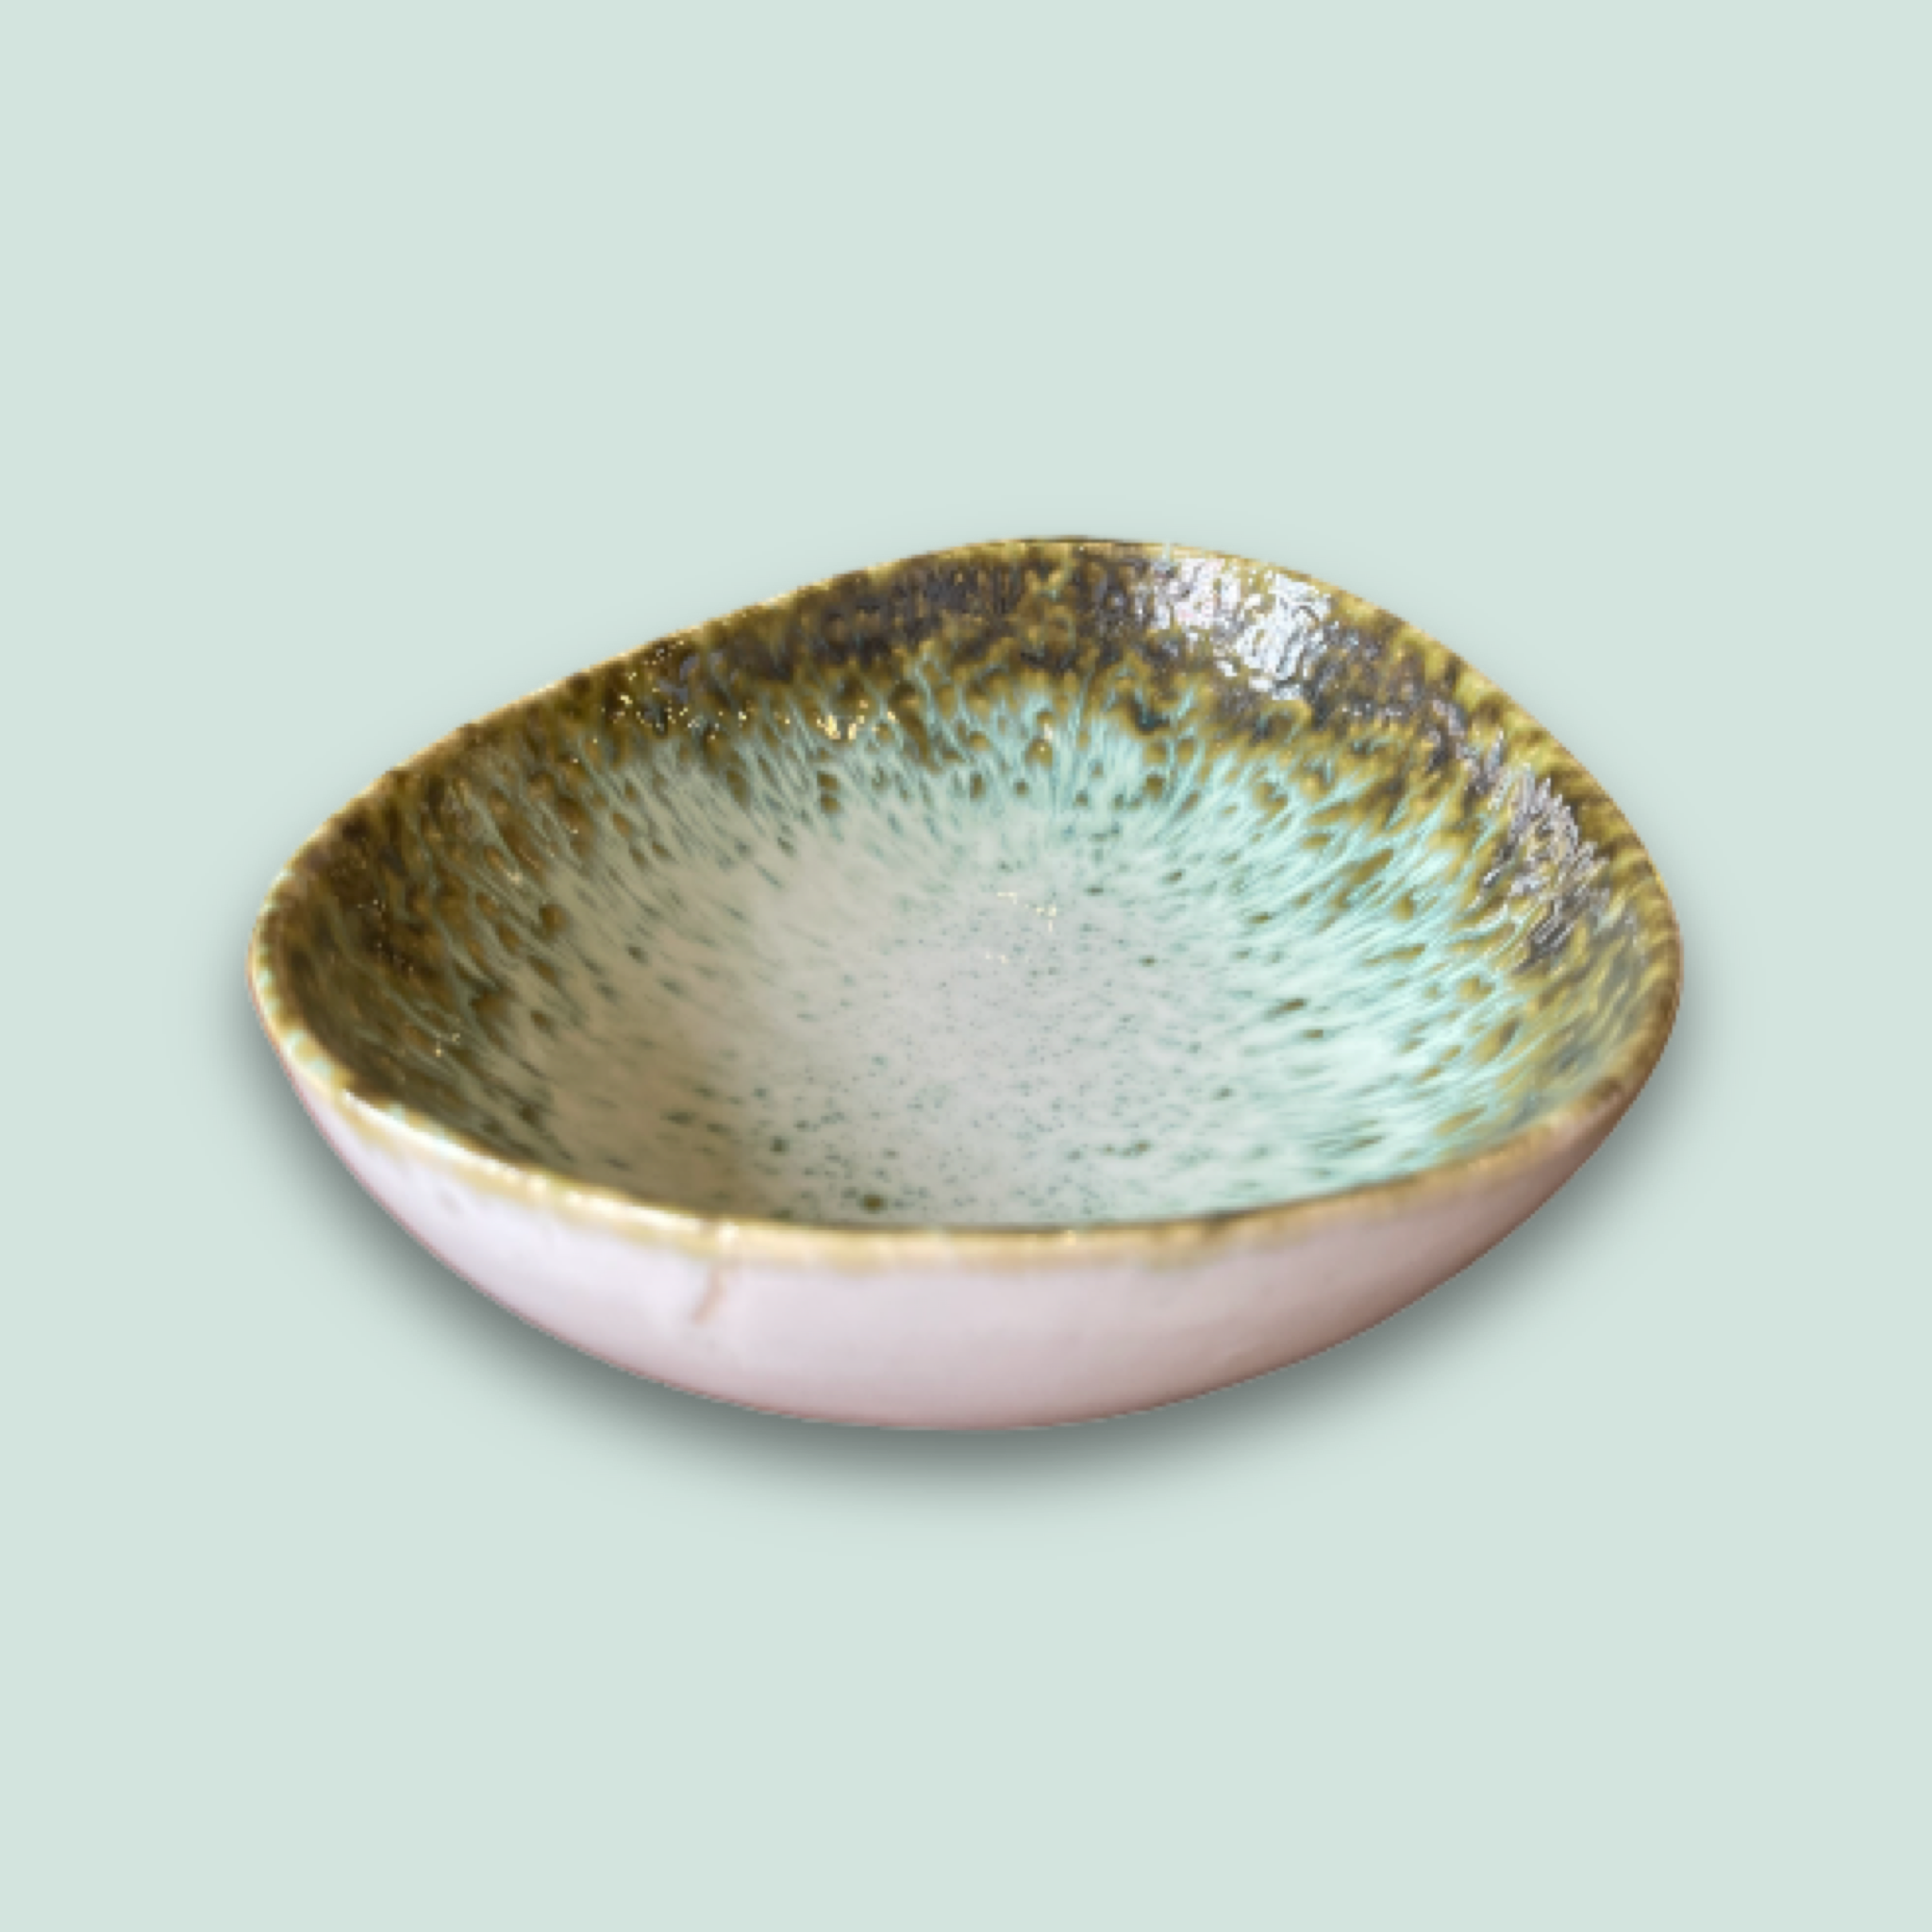 GREEN EGG BOWL by Suuuper